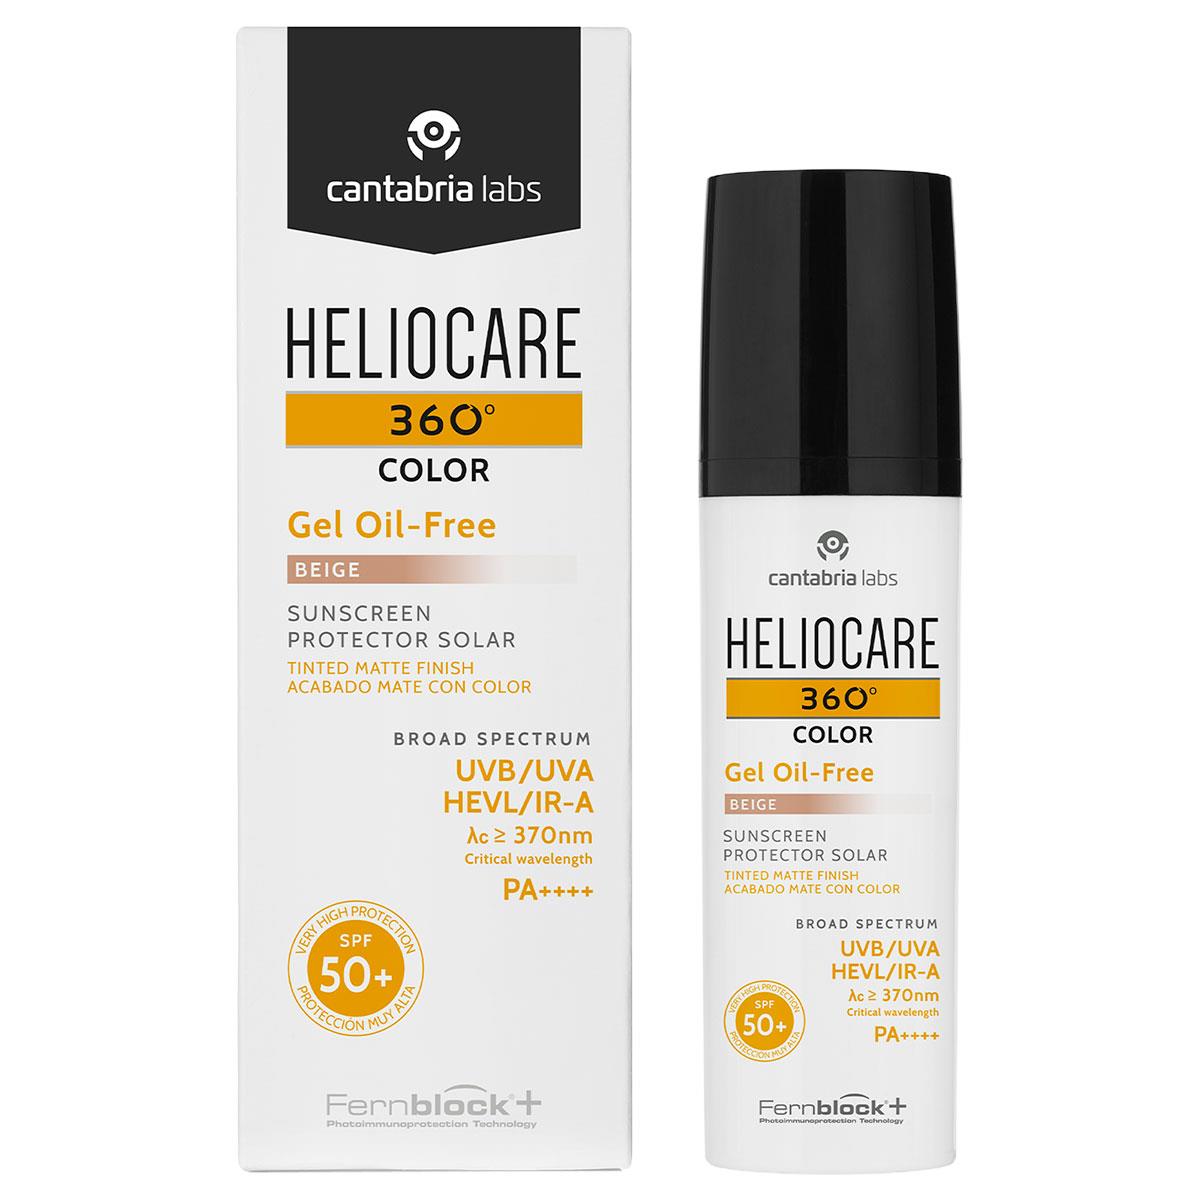 HELIOCARE 360 COLOR GEL OIL FREE BEIGE 50 ML | The Glow Shop